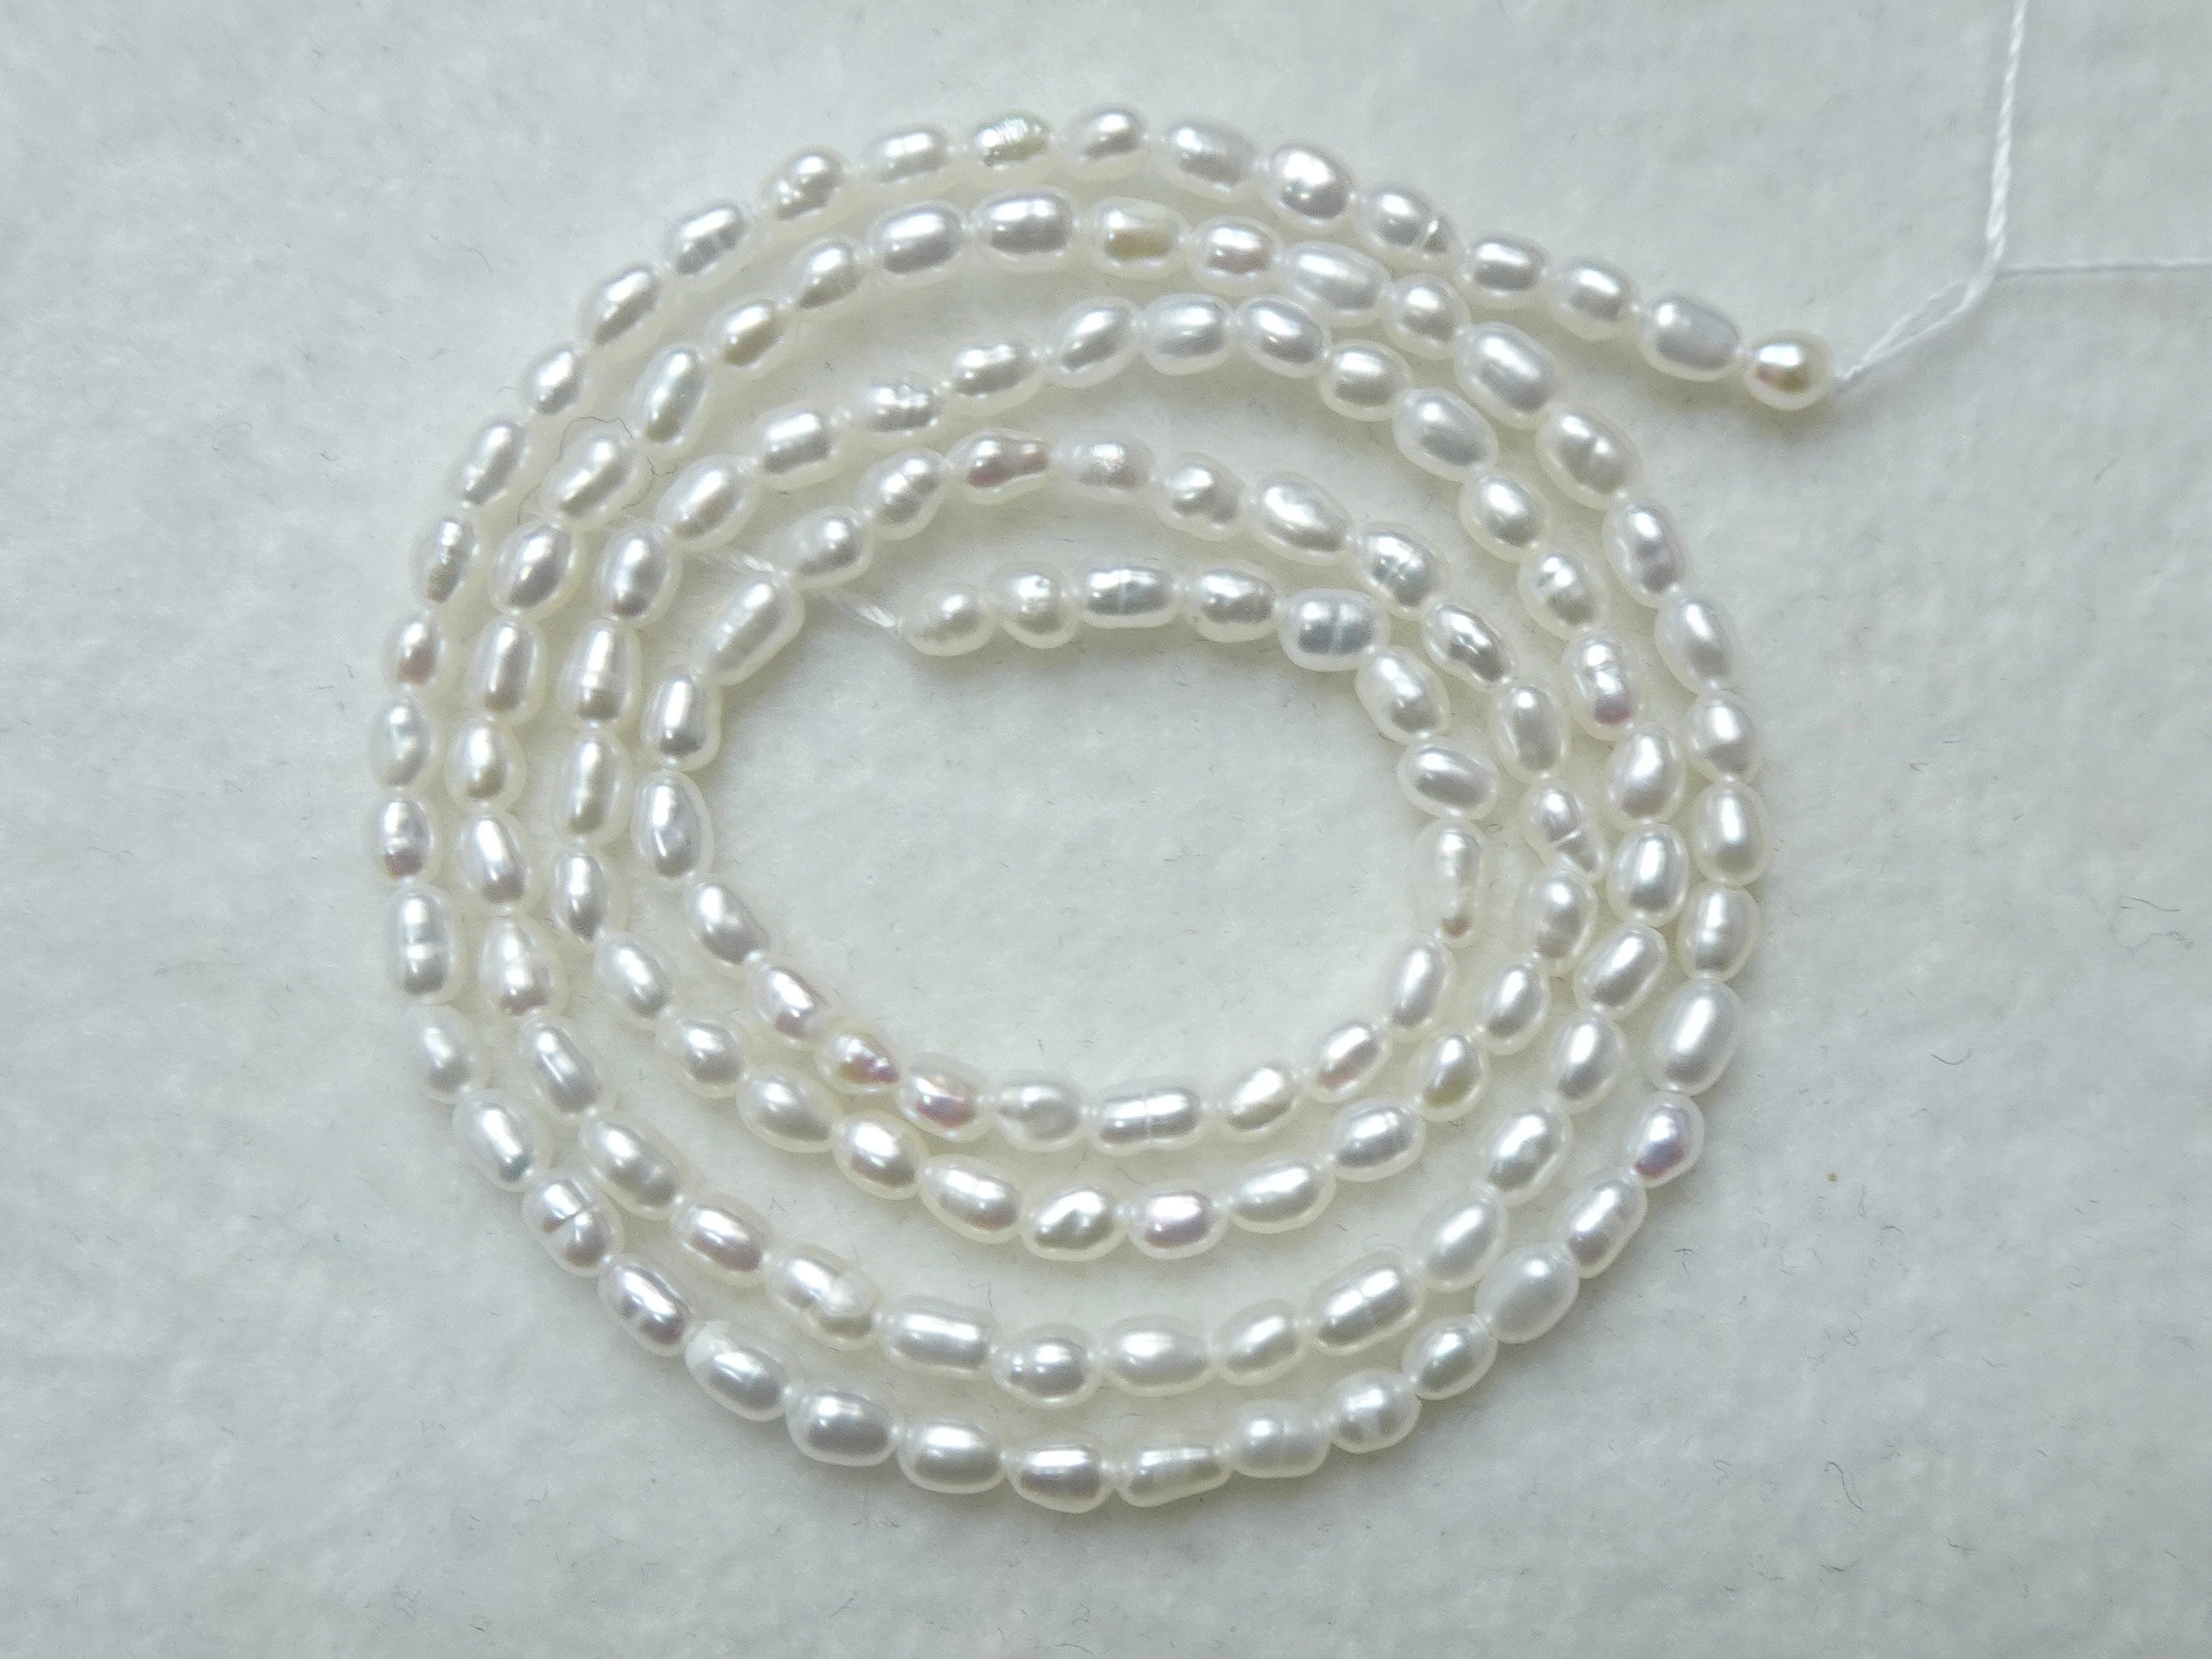 Oval Pearl Beads, 5-6mm Rice Shape, Freshwater Pearl, Natural White Color  Pearls, Genuine Fresh Water Small Pearl, Full Strand, FM400-XS 